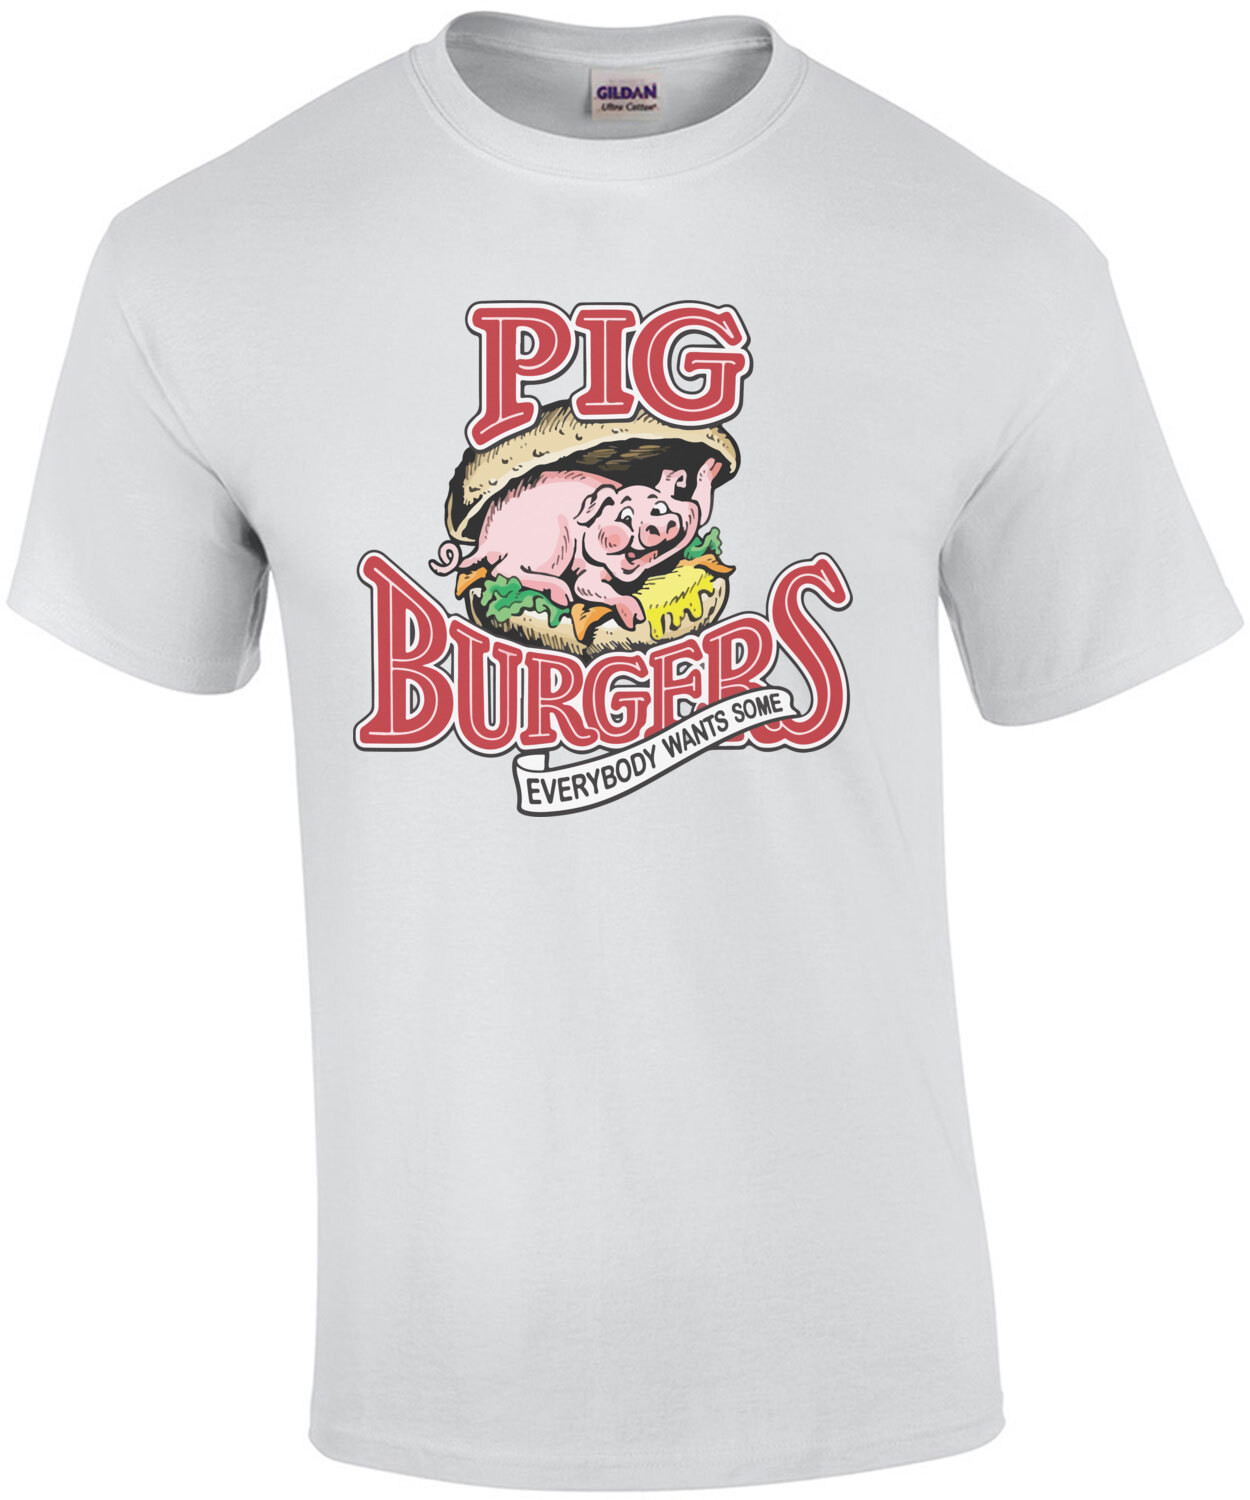 Pig Burgers - Everybody wants some - Better Off Dead - 80's T-Shirt